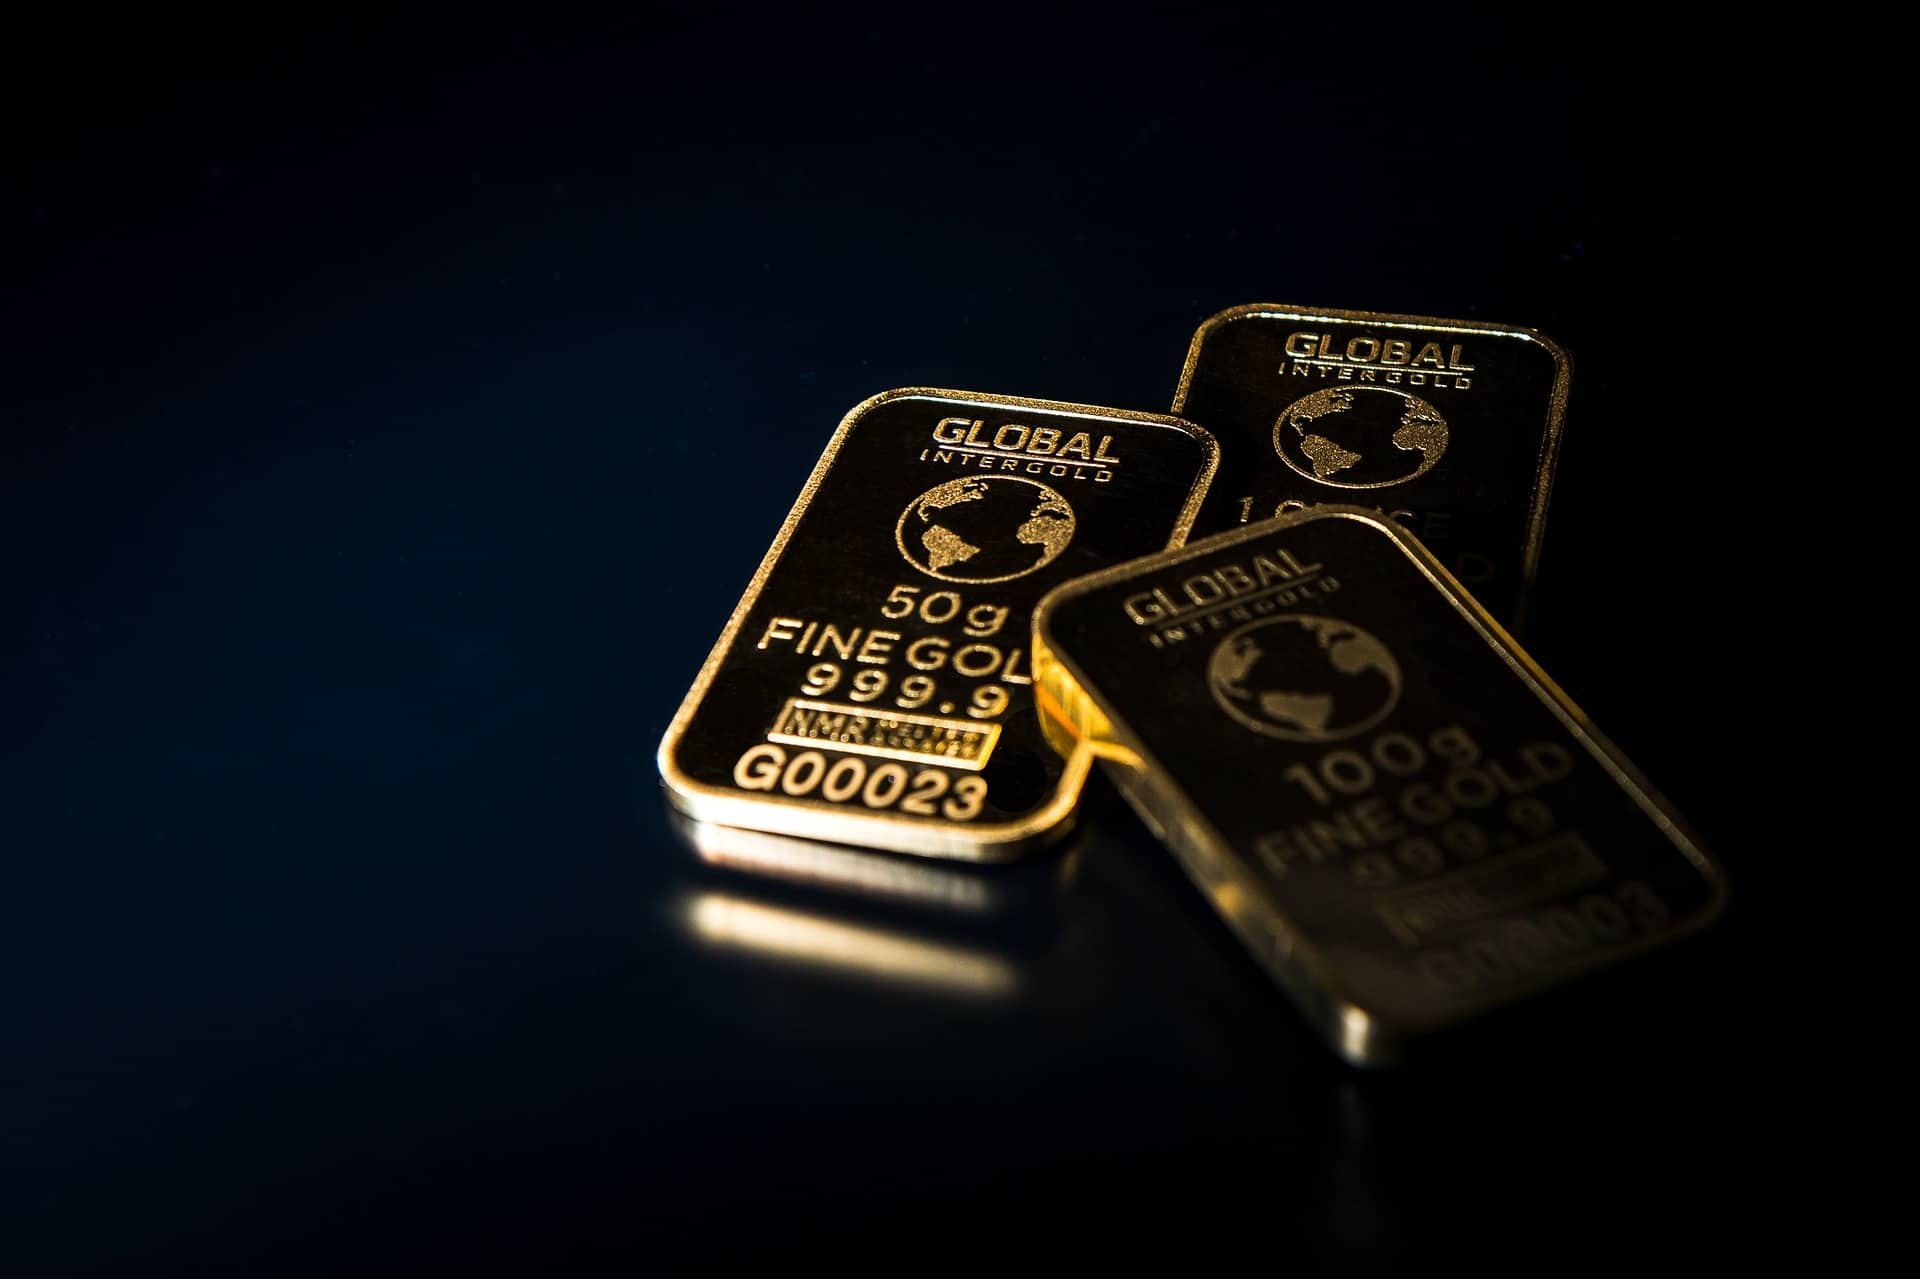 Gold prices jumped to their highest level since August 2020 as investors rushed to buy safe-haven assets amid heightened concerns over the Russia-Ukraine war and oil-market disruptions. The yellow metal rallied above $2,000 a troy ounce on the Comex division on March 7. Eventually, the Gold April futures contract settled at $1995.90 per troy ounce with a gain of 1.09 percent. In domestic markets, the Gold April futures contract settled at  <span class='webrupee'>₹</span>53,517 per 10 gram with a gain of 1.82 percent.